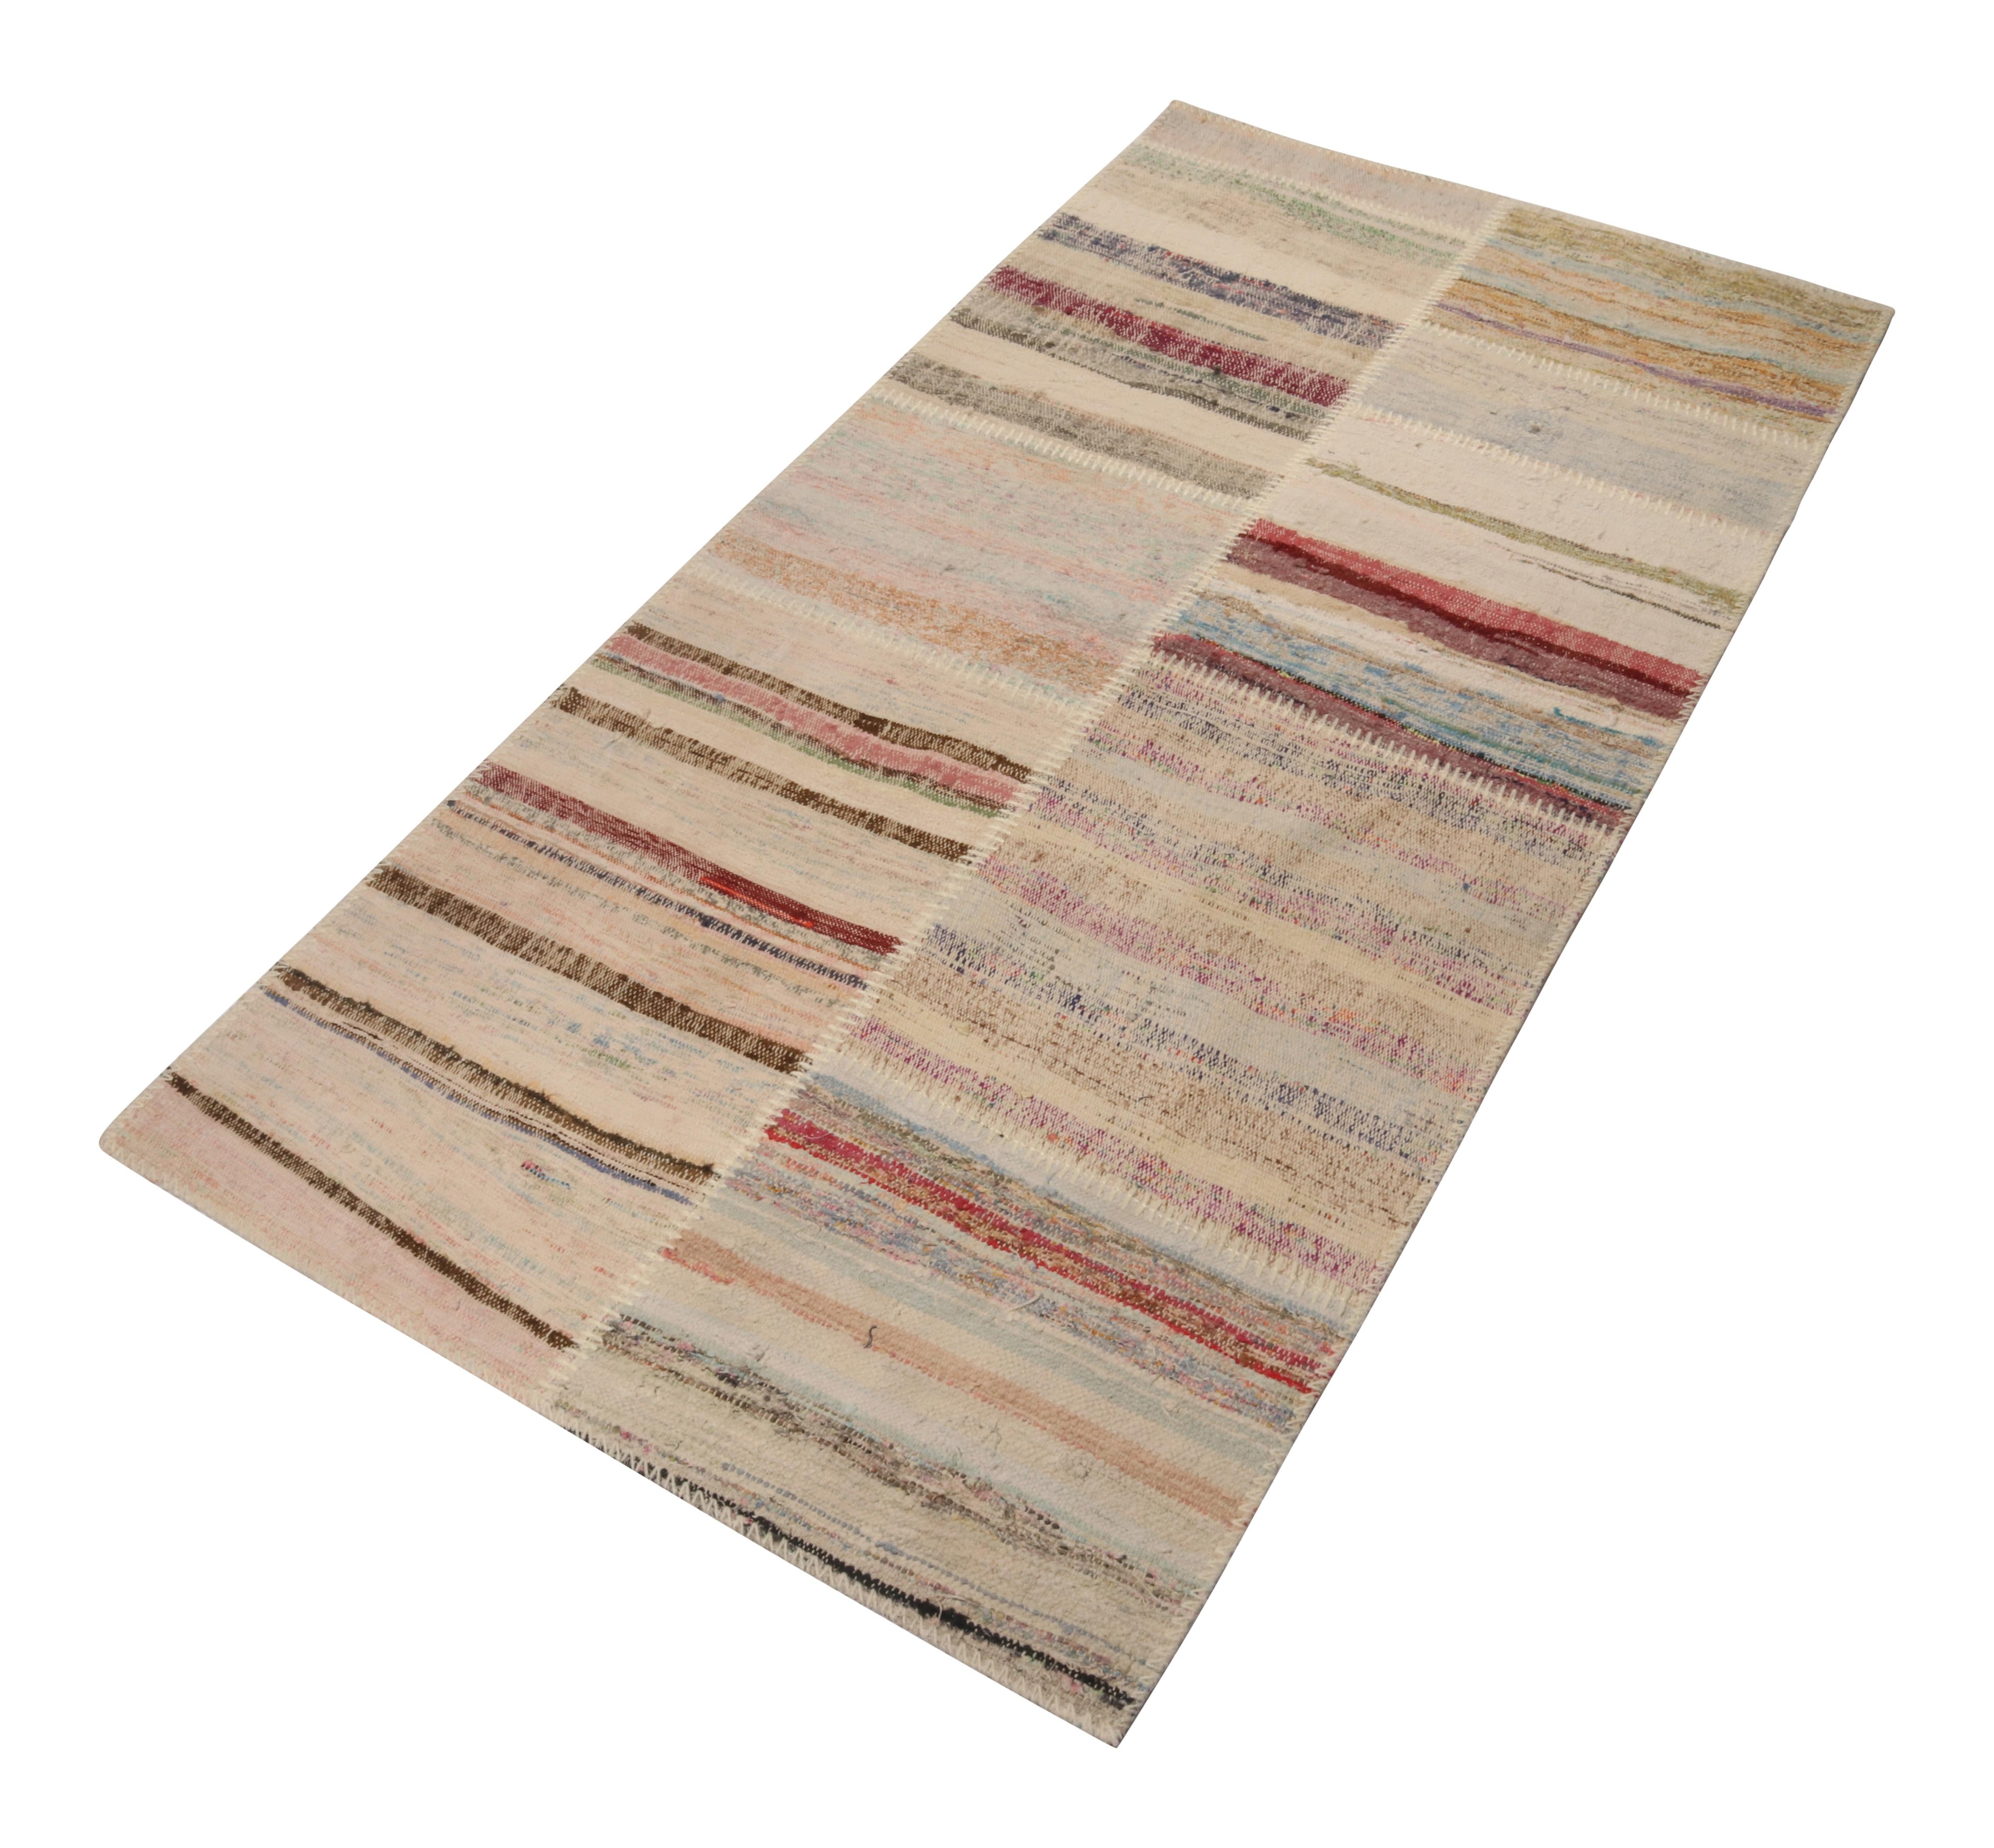 Handwoven in wool, Rug & Kilim presents a 3x6 runner from their innovative new patchwork kilim collection. 

On the design: 

This flat weave technique repurposes vintage yarns in polychromatic stripes and striae, achieving a playful look with